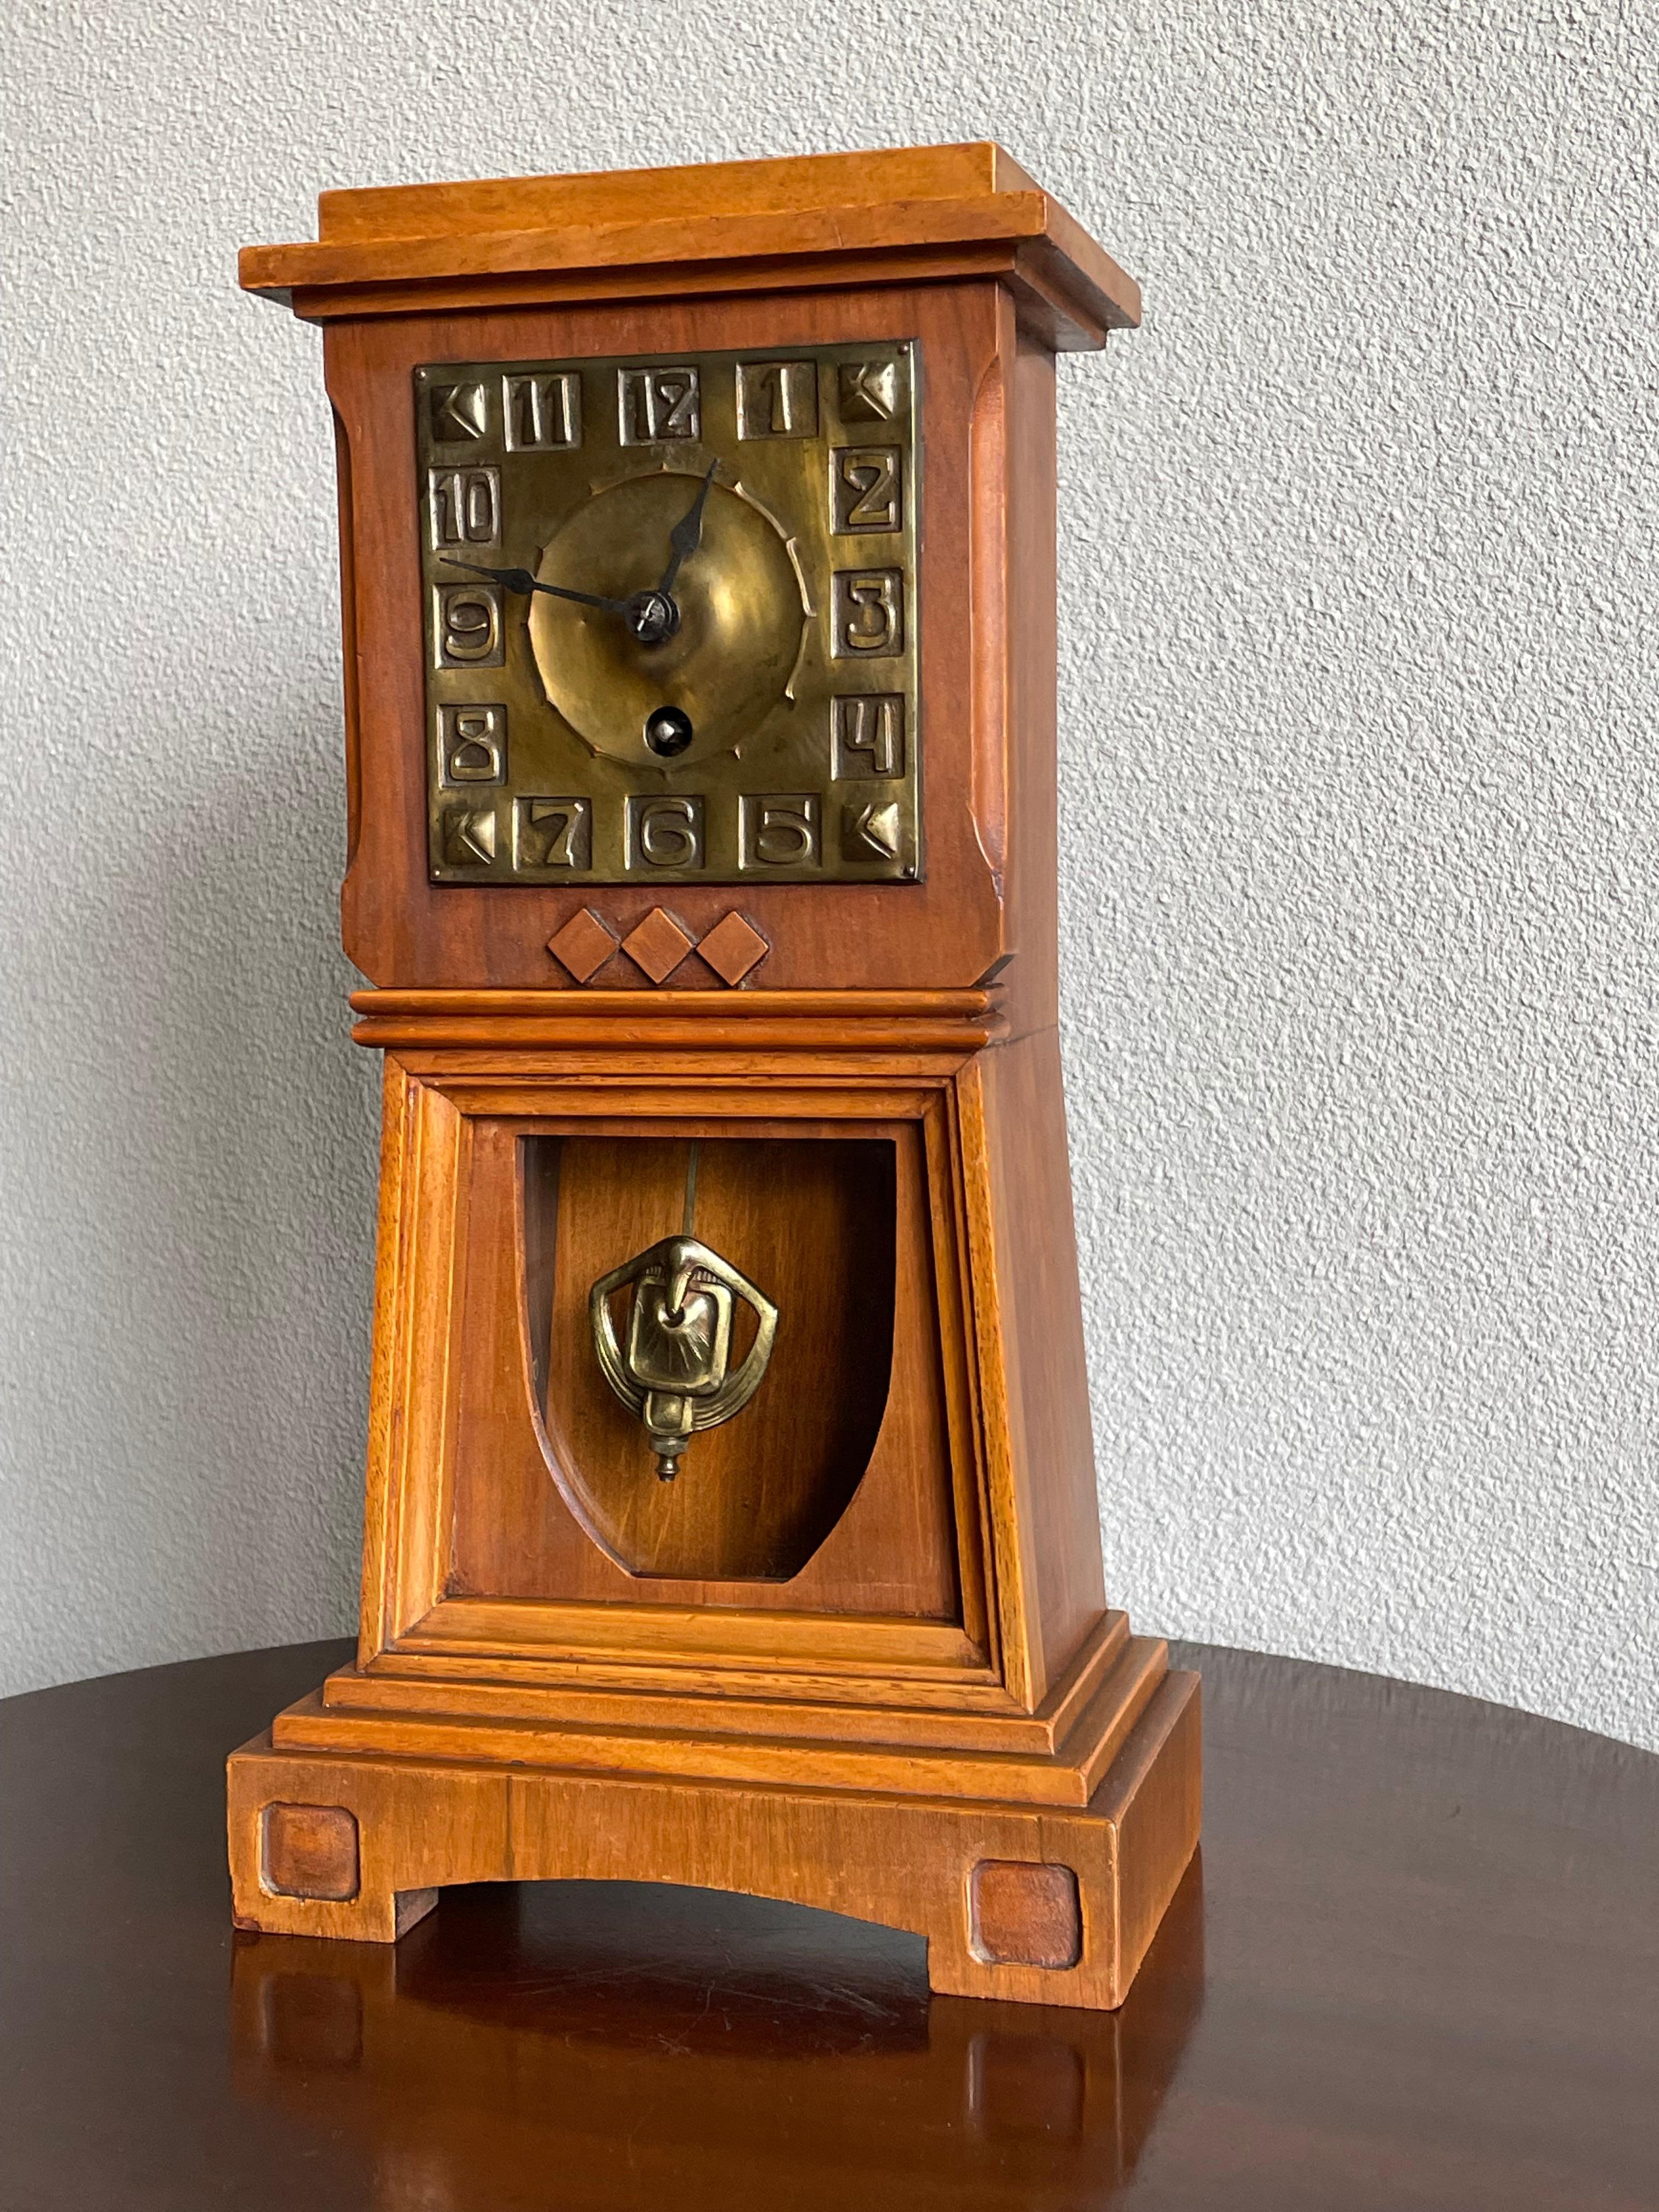 Metal Arts and Crafts Nutwood Mantel or Table Clock with an Embossed Brass Dial Face For Sale